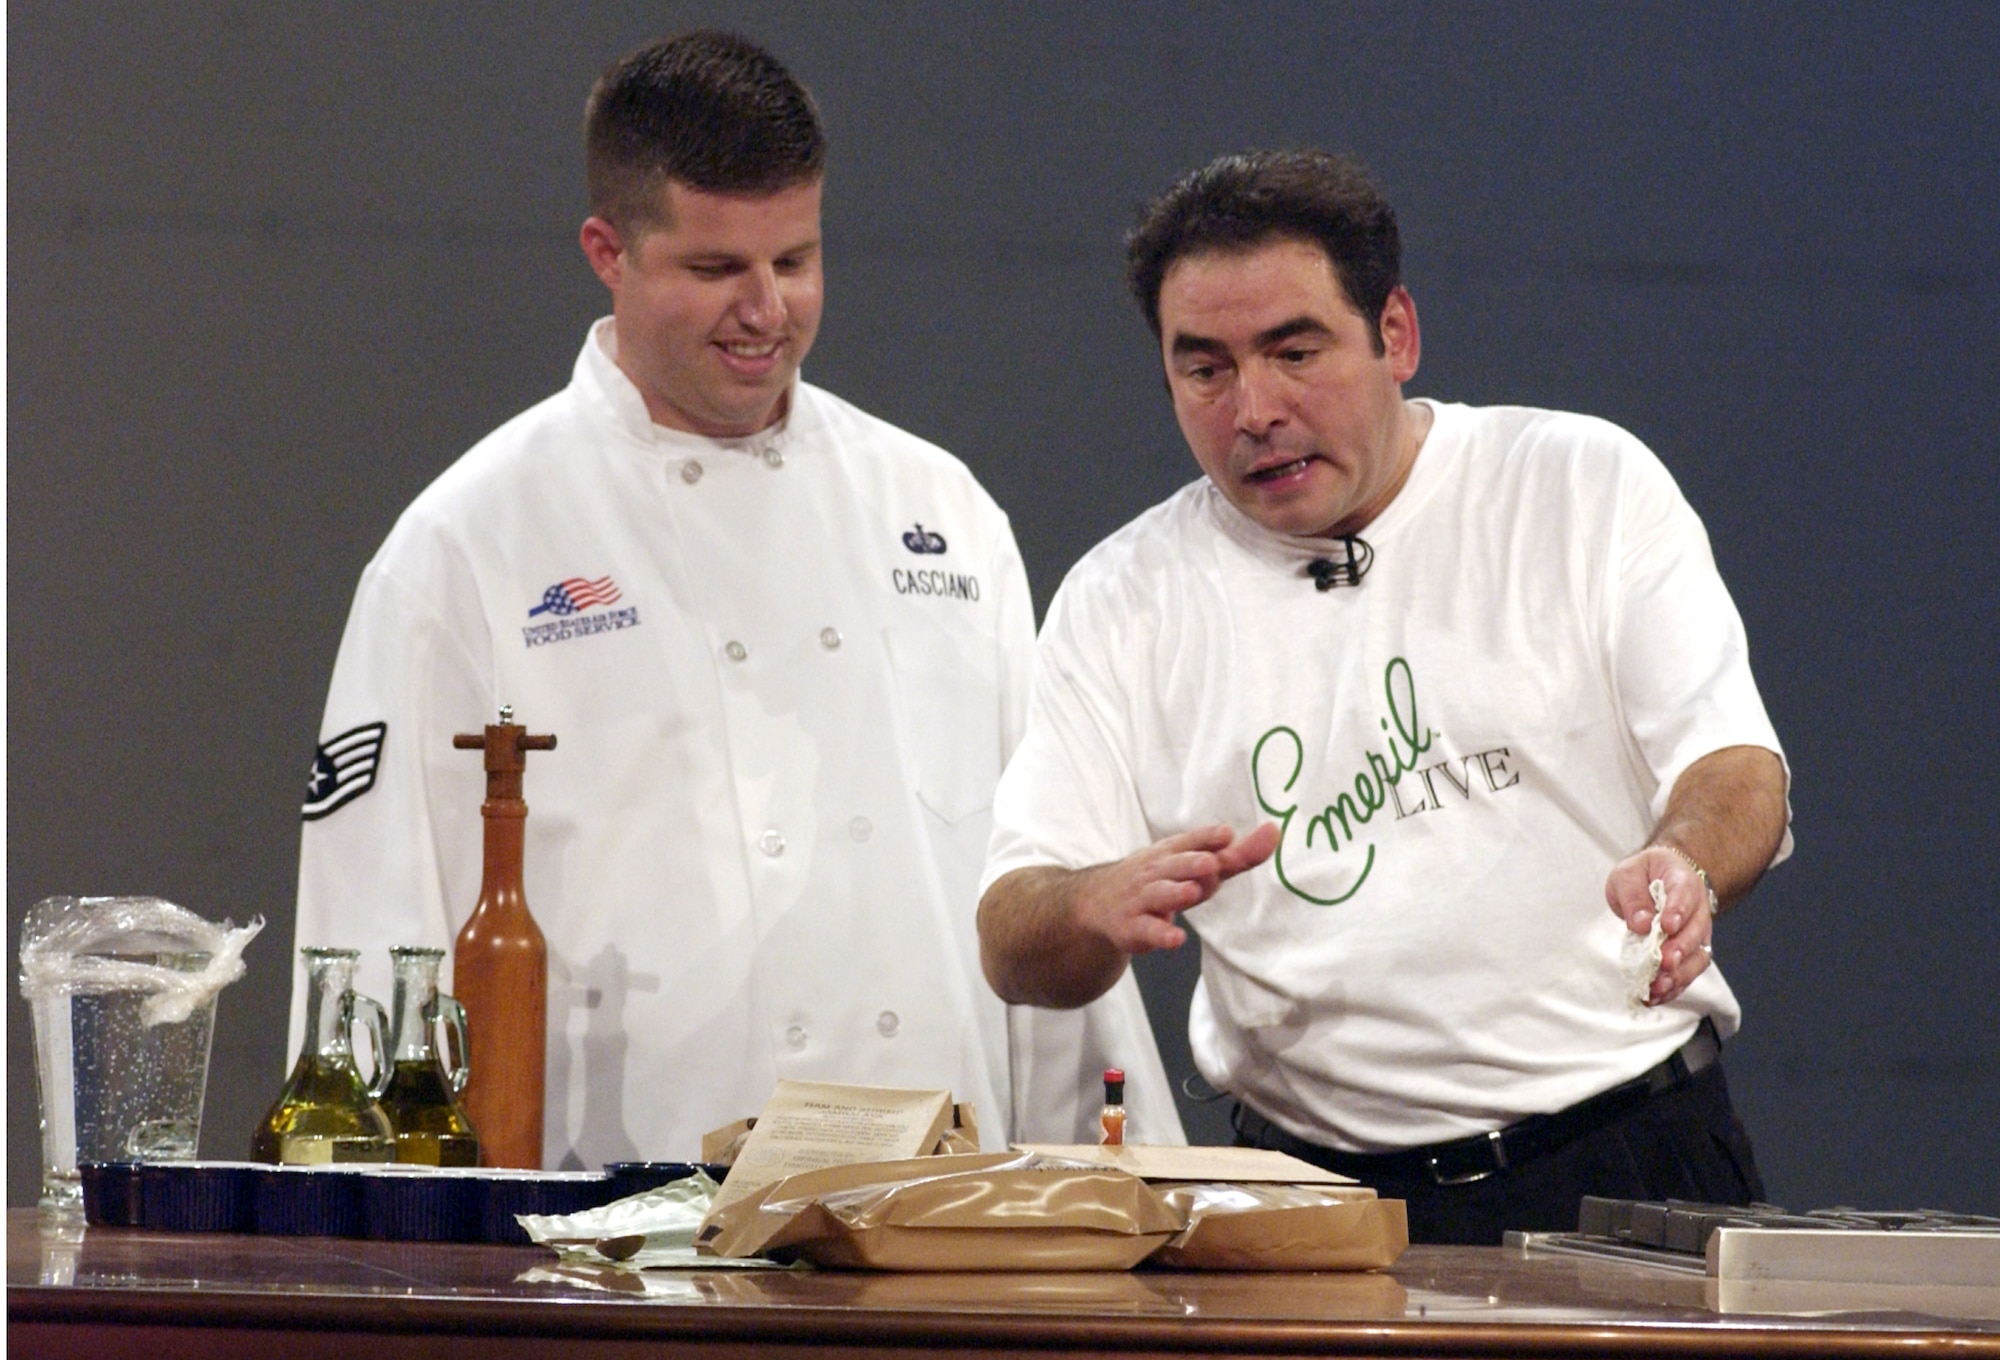 MCGUIRE AIR FORCE BASE, N.J. -- Staff Sgt. Kevin Casciano, a chef with the 305th Services Squadron, and Emeril Lagasse discuss meals ready to eat during the Sept. 25 taping of the celebrity chef's Thanksgiving special here.  The show is scheduled to air Nov. 16.  Check local listings for times.  (U.S. Air Force photo by Denise Gould)